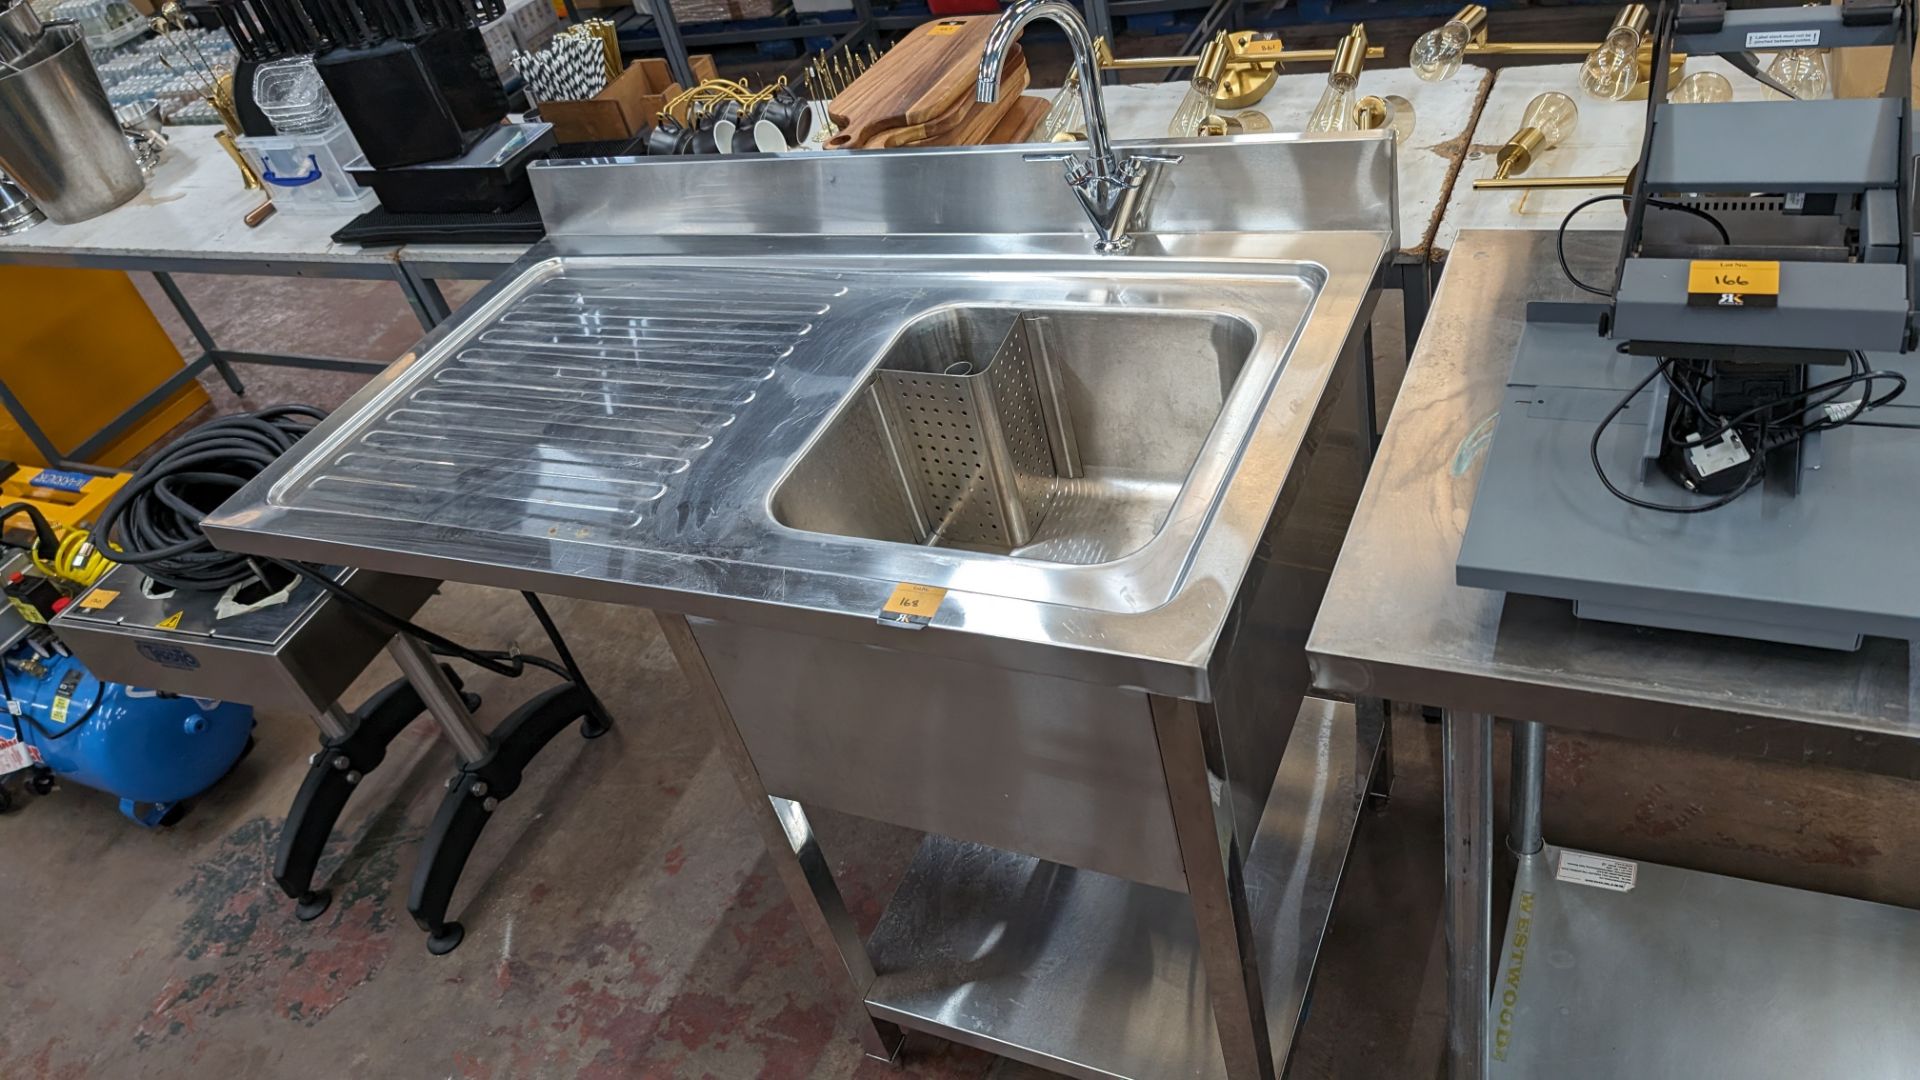 Stainless steel floor standing basin with drainer to the side plus mixer tap